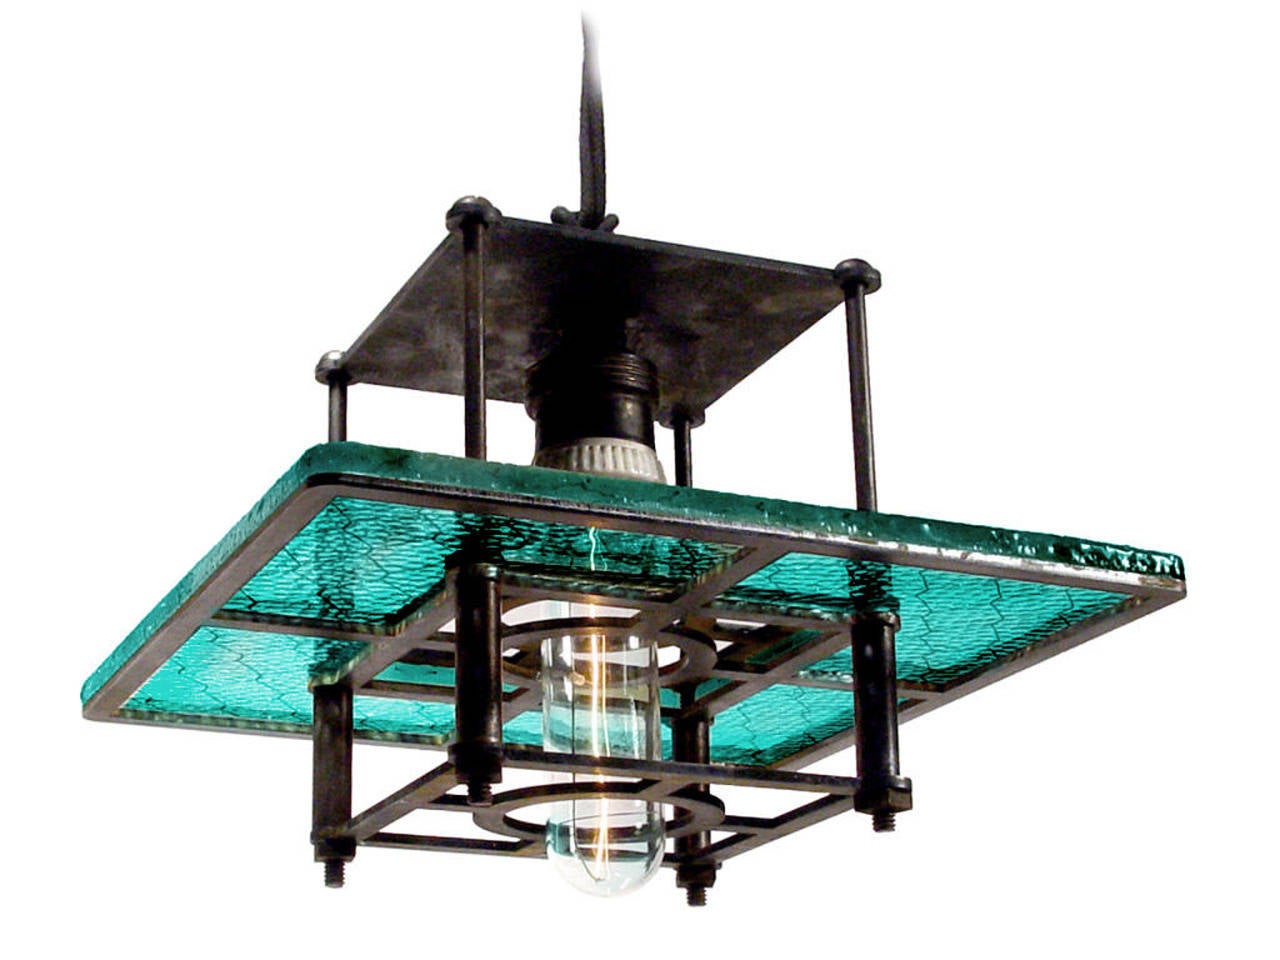 This is one of the first lamps The Early Electrics Design Studio introduced and featured a rare blue green Industrial glass. It quickly sold out. It took a couple of years to discover another collection of this hard to find color glass and can offer